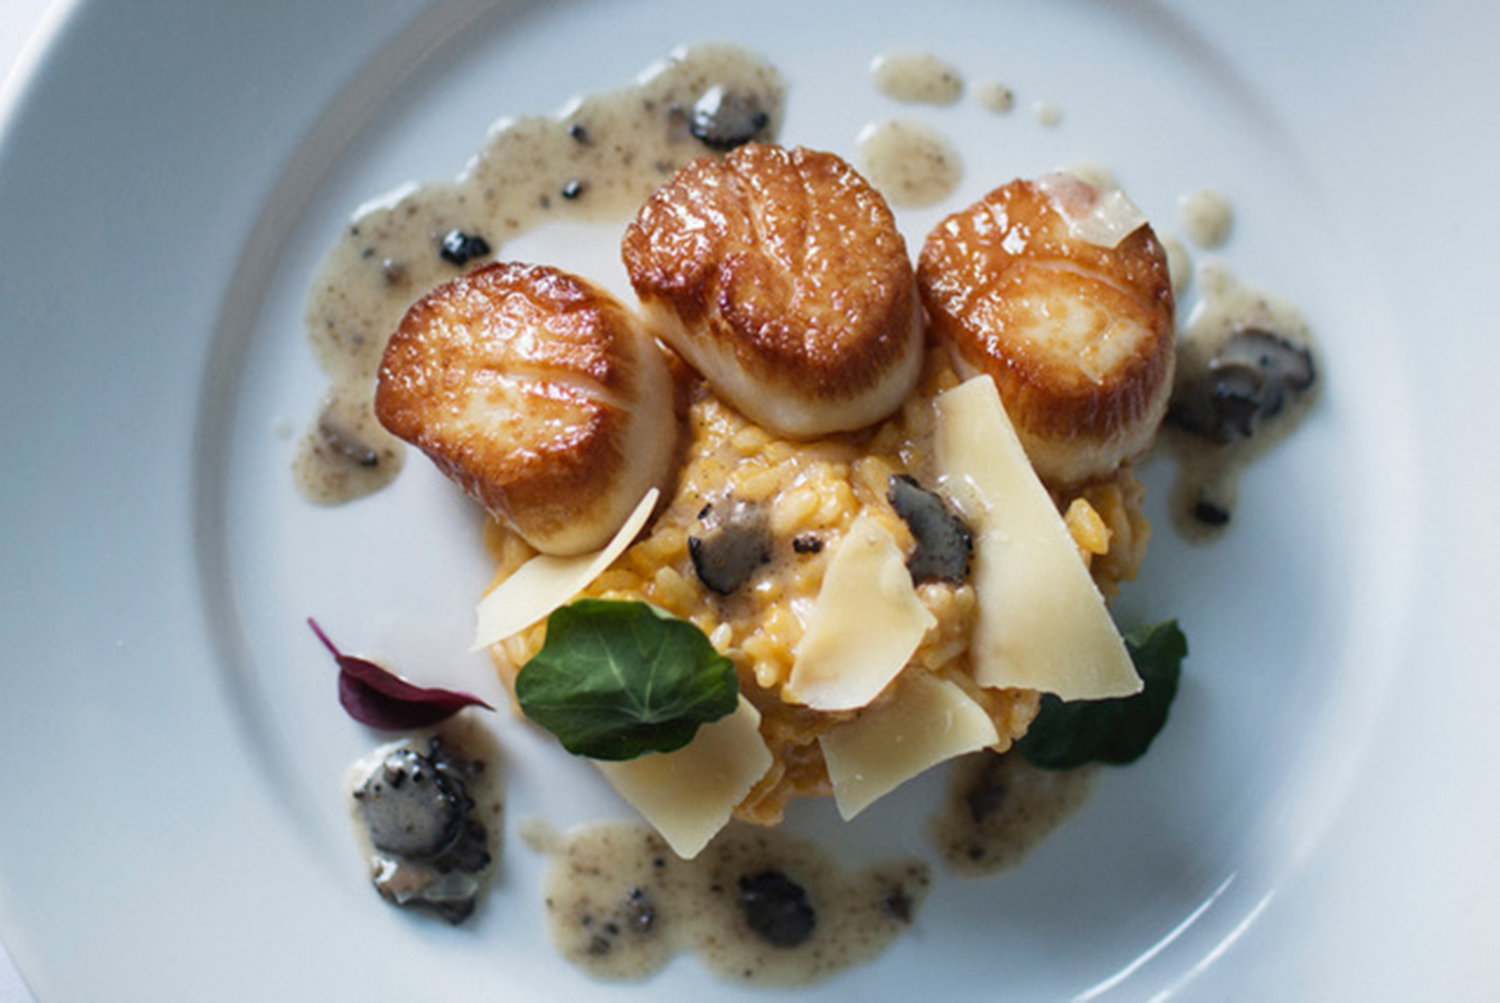 Chef Roland's Seasonal Scallop dish features pan-crusted scallops with butternut risotto and a black truffle pan sauce